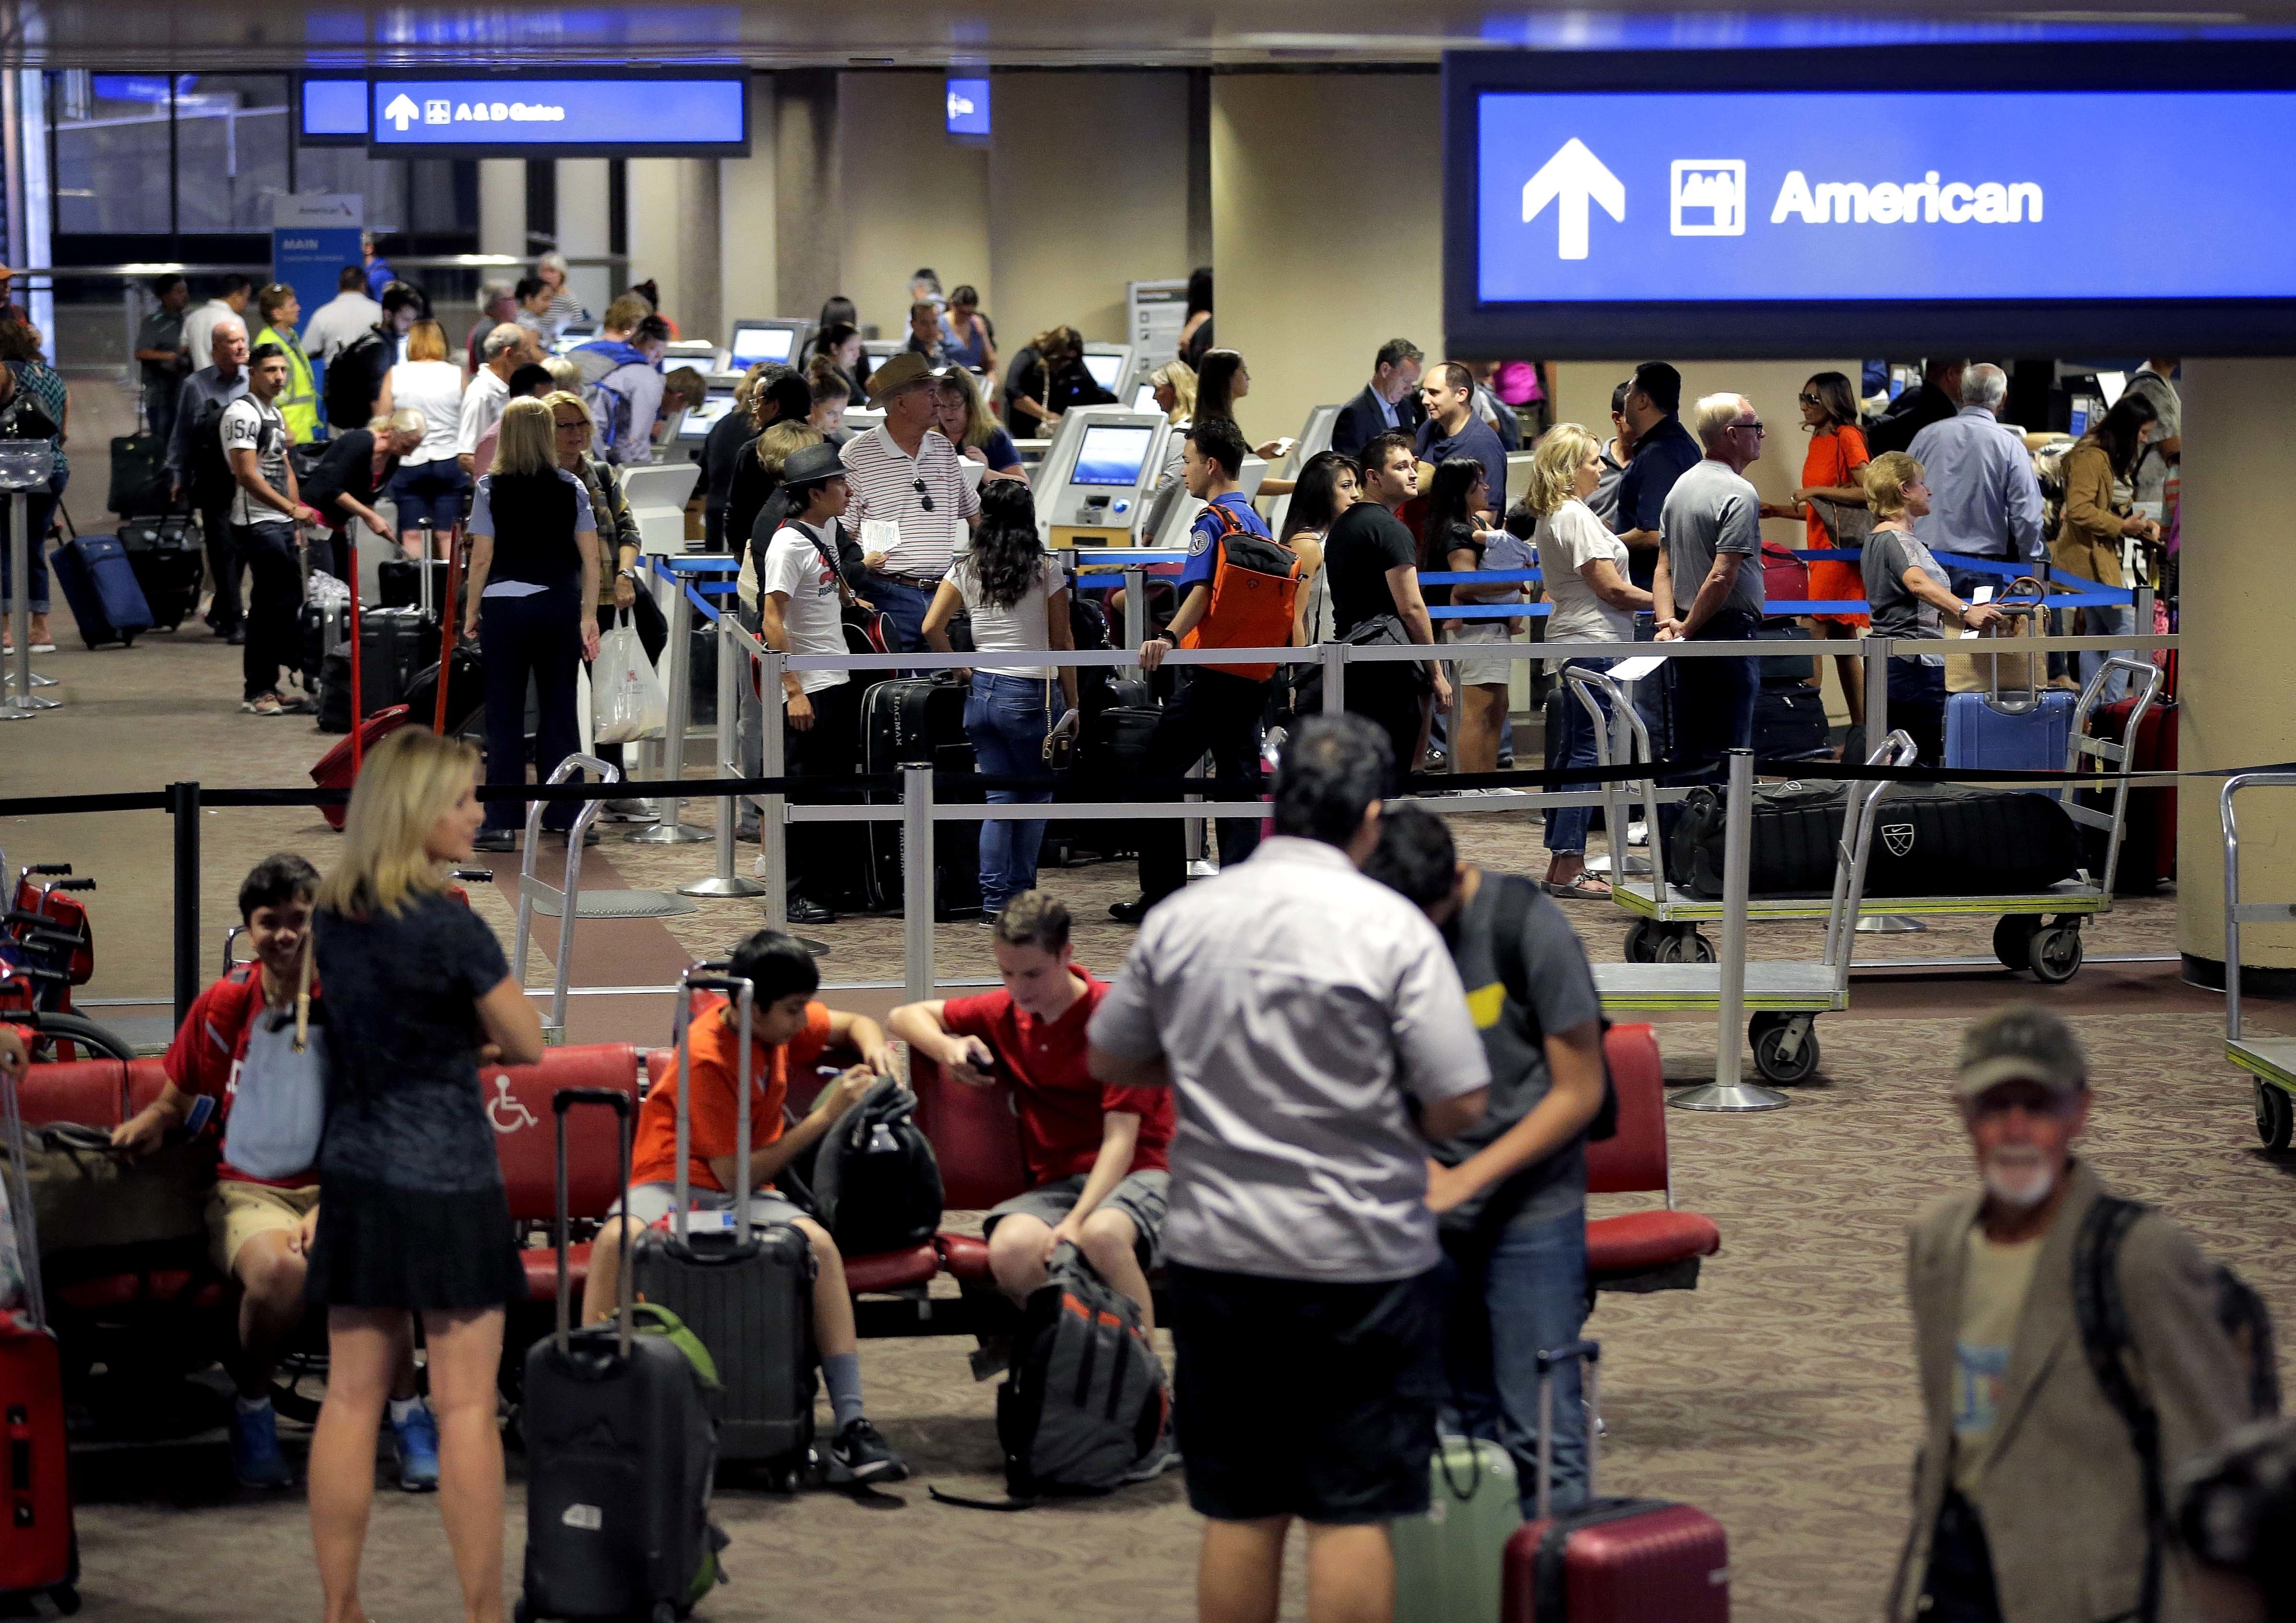 FILE - In this May 27, 2016 file photo, passengers line up to check in before their flight at Sky Harbor International Airport in Phoenix. Significant progress has been made on shortening screening lines since earlier this spring when airlines reported thousands of frustrated passengers were missing flights, the head of the Transportation Security Administration said Tuesday, June 7, 2016. (AP Photo/Matt York, File)